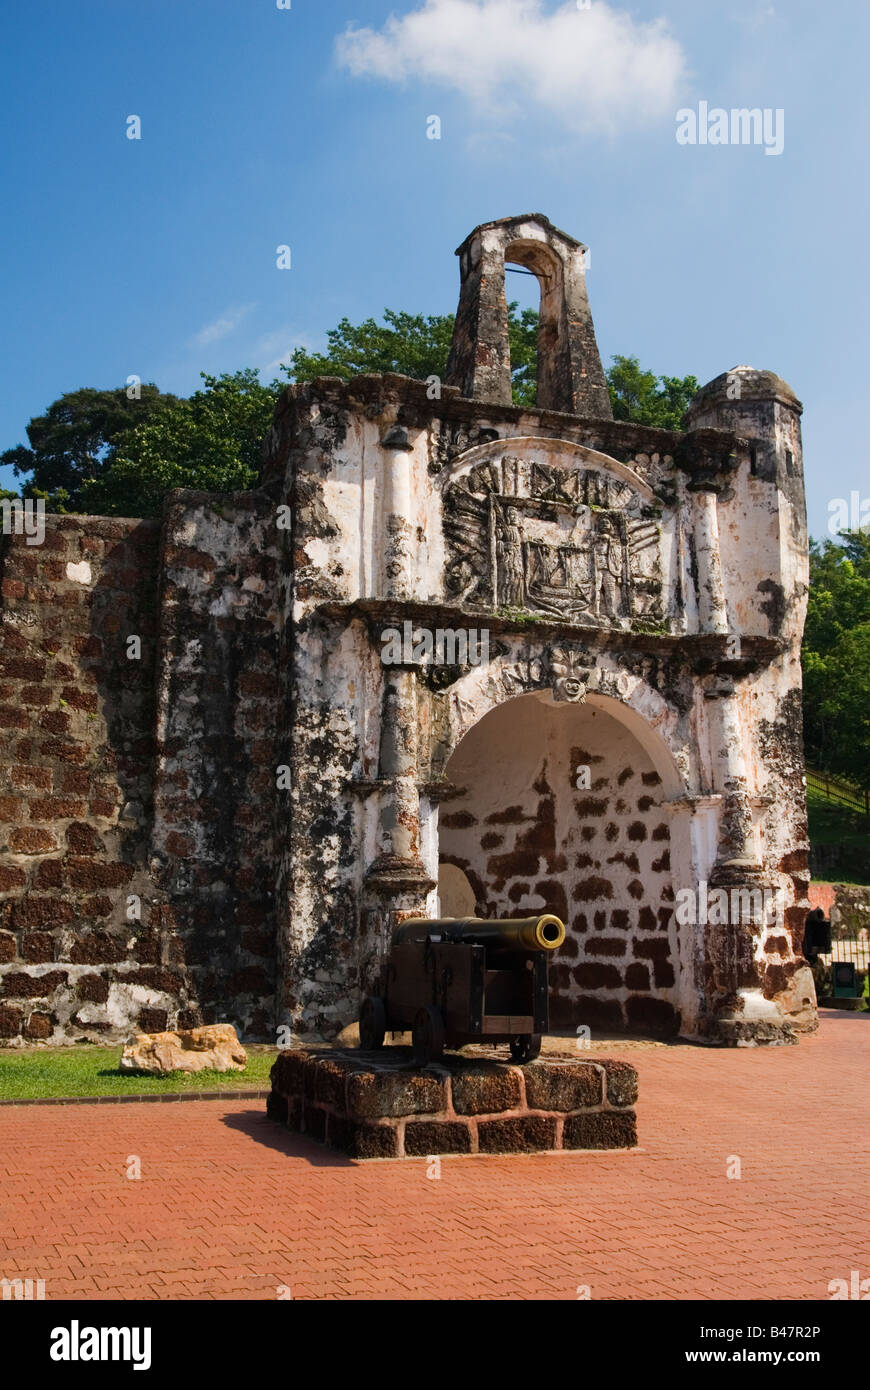 Cannon in front of Porta de Santiago at A Famosa originally constructed by the Portuguese in 1511, then restored by the Dutch in Malacca, Malaysia Stock Photo